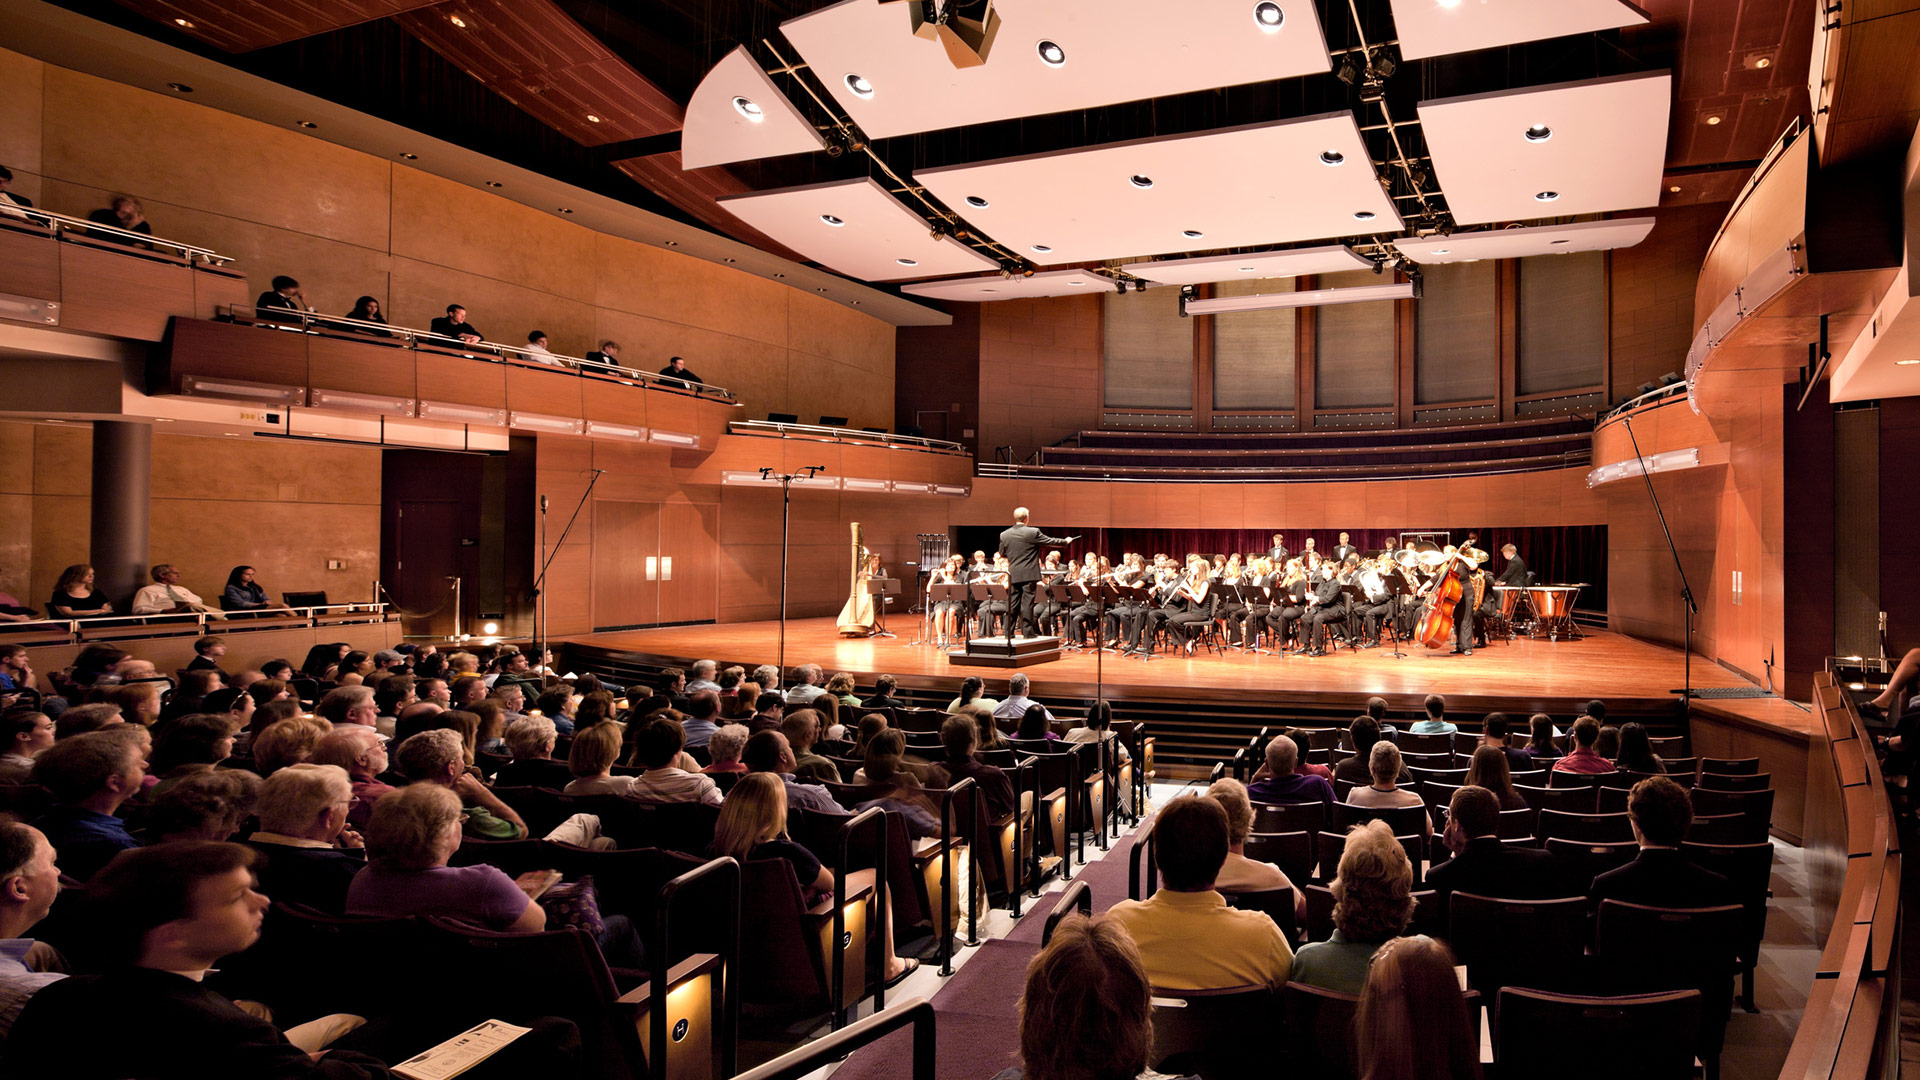 James Madison University, Forbes Center for the Performing Arts